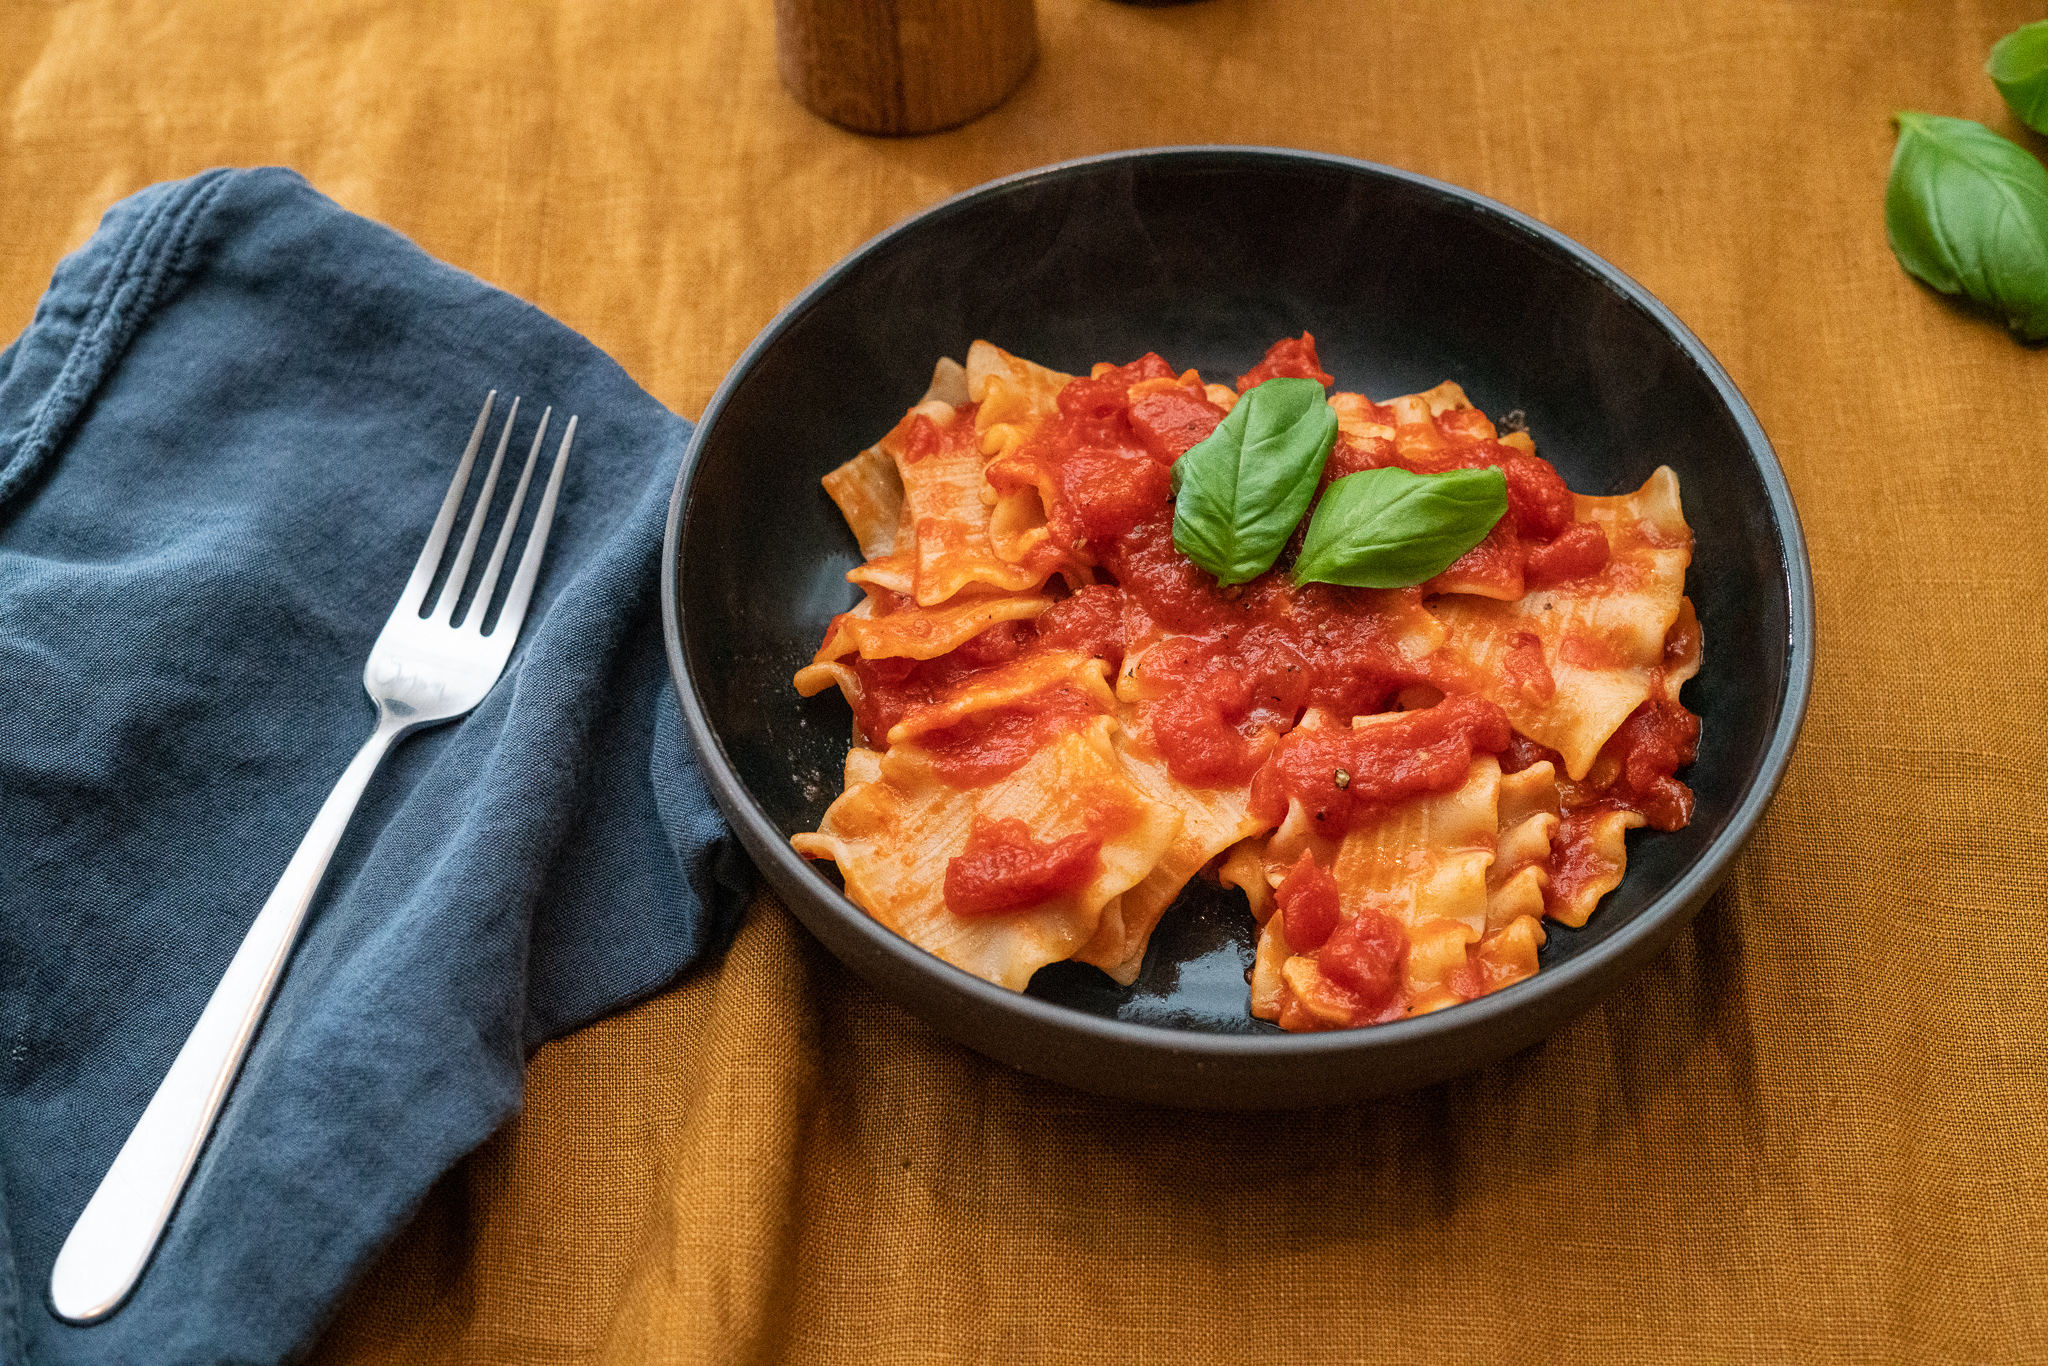 Classic Pasta With Homemade Tomato Sauce image